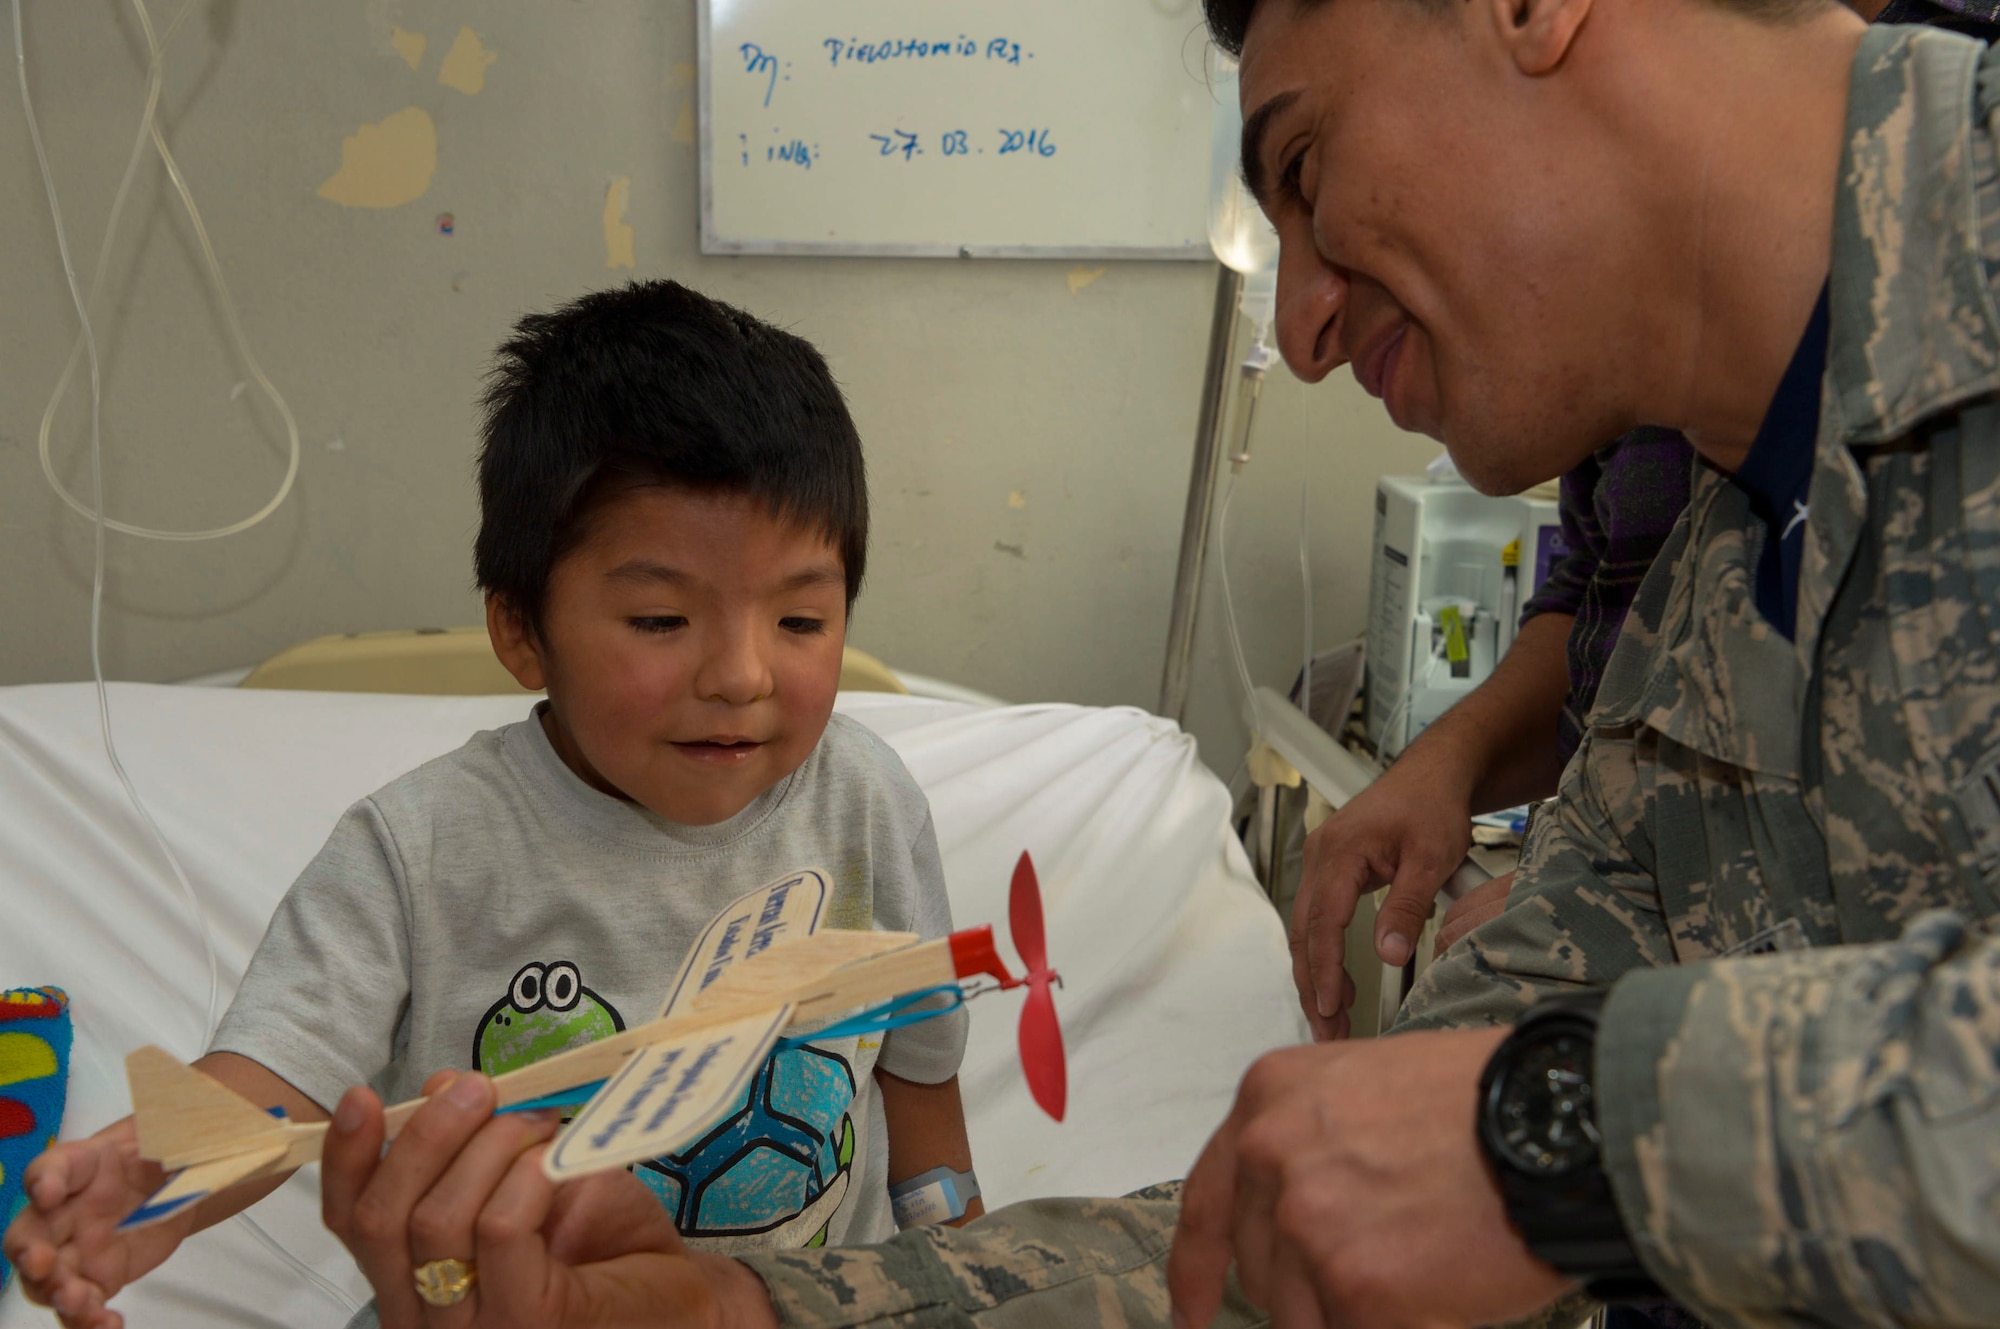 Staff Sgt. Juan Gomez-Navarro, fuel systems specialist with the F-22 Demonstration Team, helps a child build a plane at San Juan de Dios hospital in Santiago, Chile, March 31, 2016.  The Airmen are in Chile to participate in the 2016 FIDAE Air and Space Trade Show and spent some of their down-time visiting children in multiple hospitals.  (U.S. Air Force photo by Tech. Sgt. Heather Redman/Released)